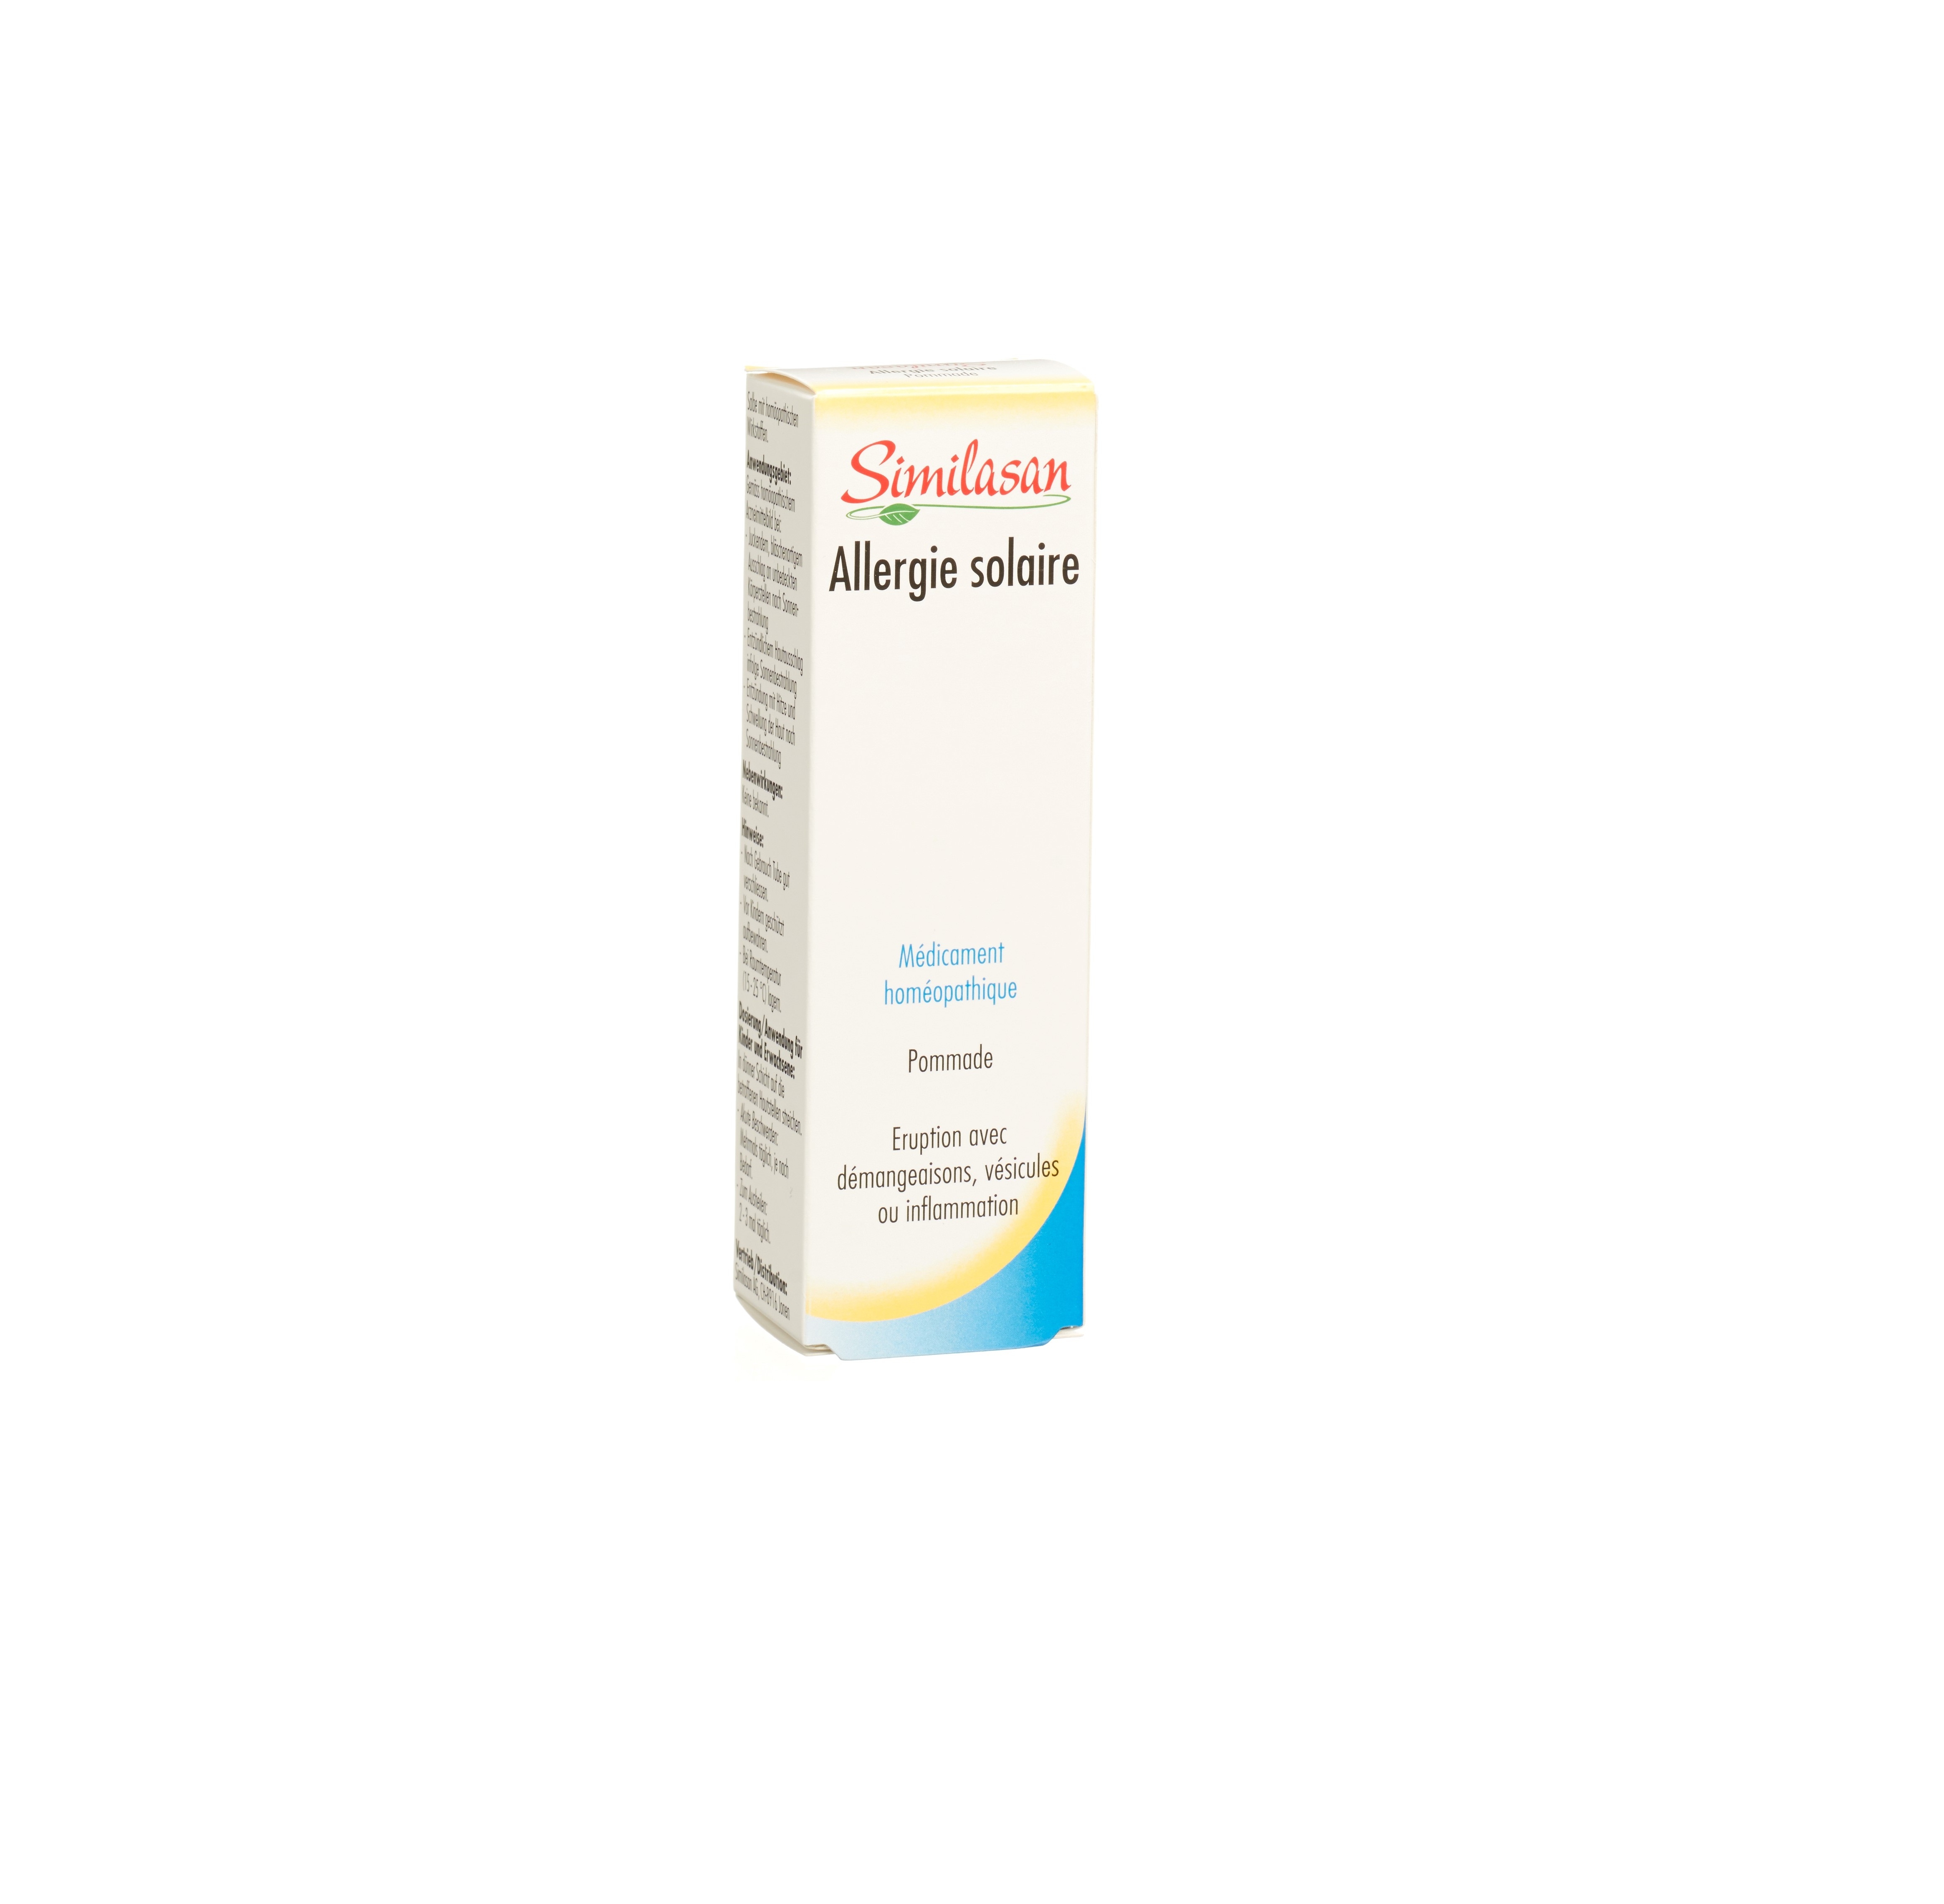 SIMILASAN Allergie Solaire Onguent 50 g